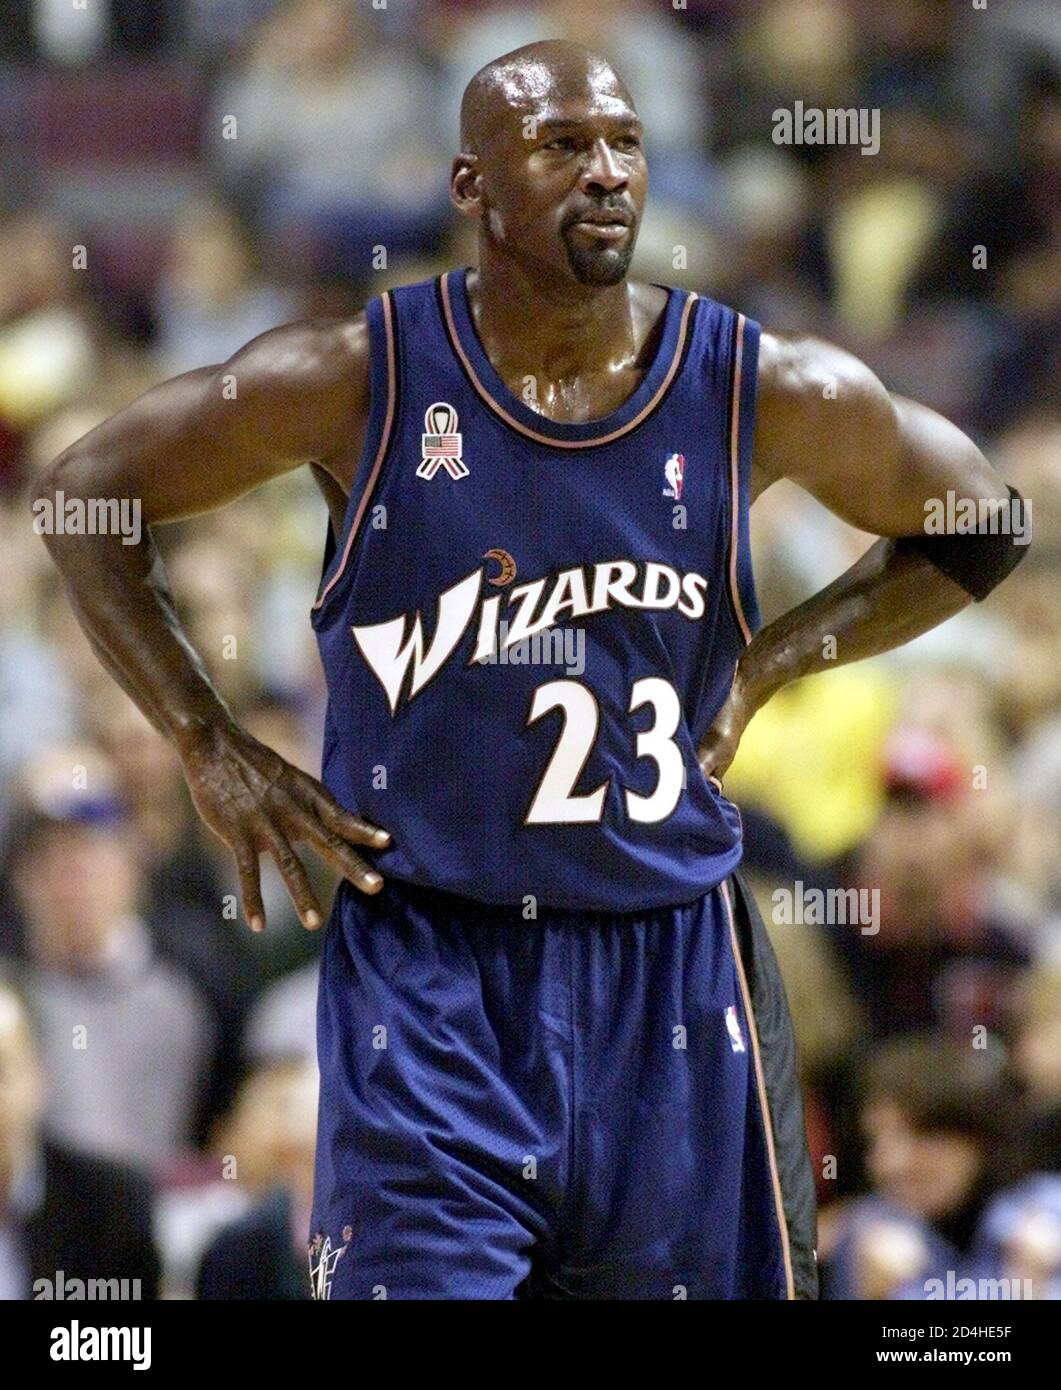 Washington Wizards guard Michael Jordan reacts after a foul call against  the Wizards during pre-season NBA action against the [Detroit Pistons in  Auburn Hills] October 11, 2001. This is Jordan's first game